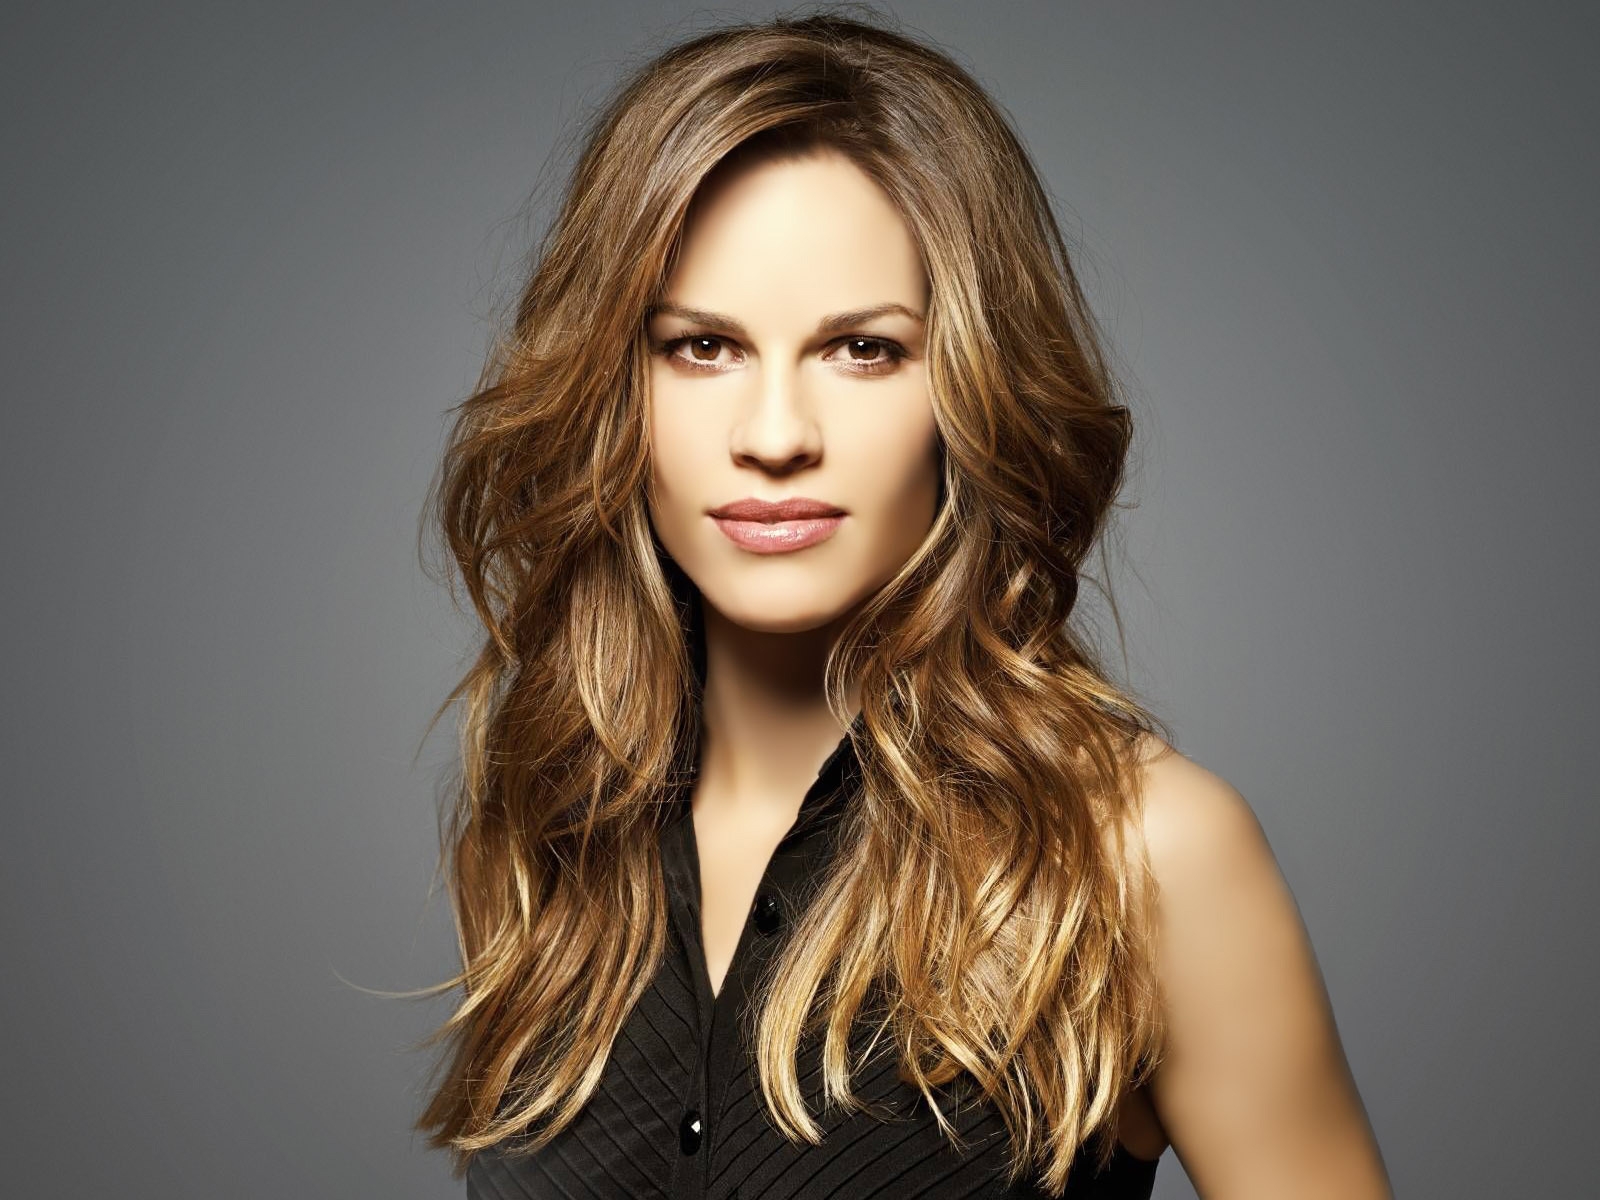 Gorgeous Hilary Swank for 1600 x 1200 resolution